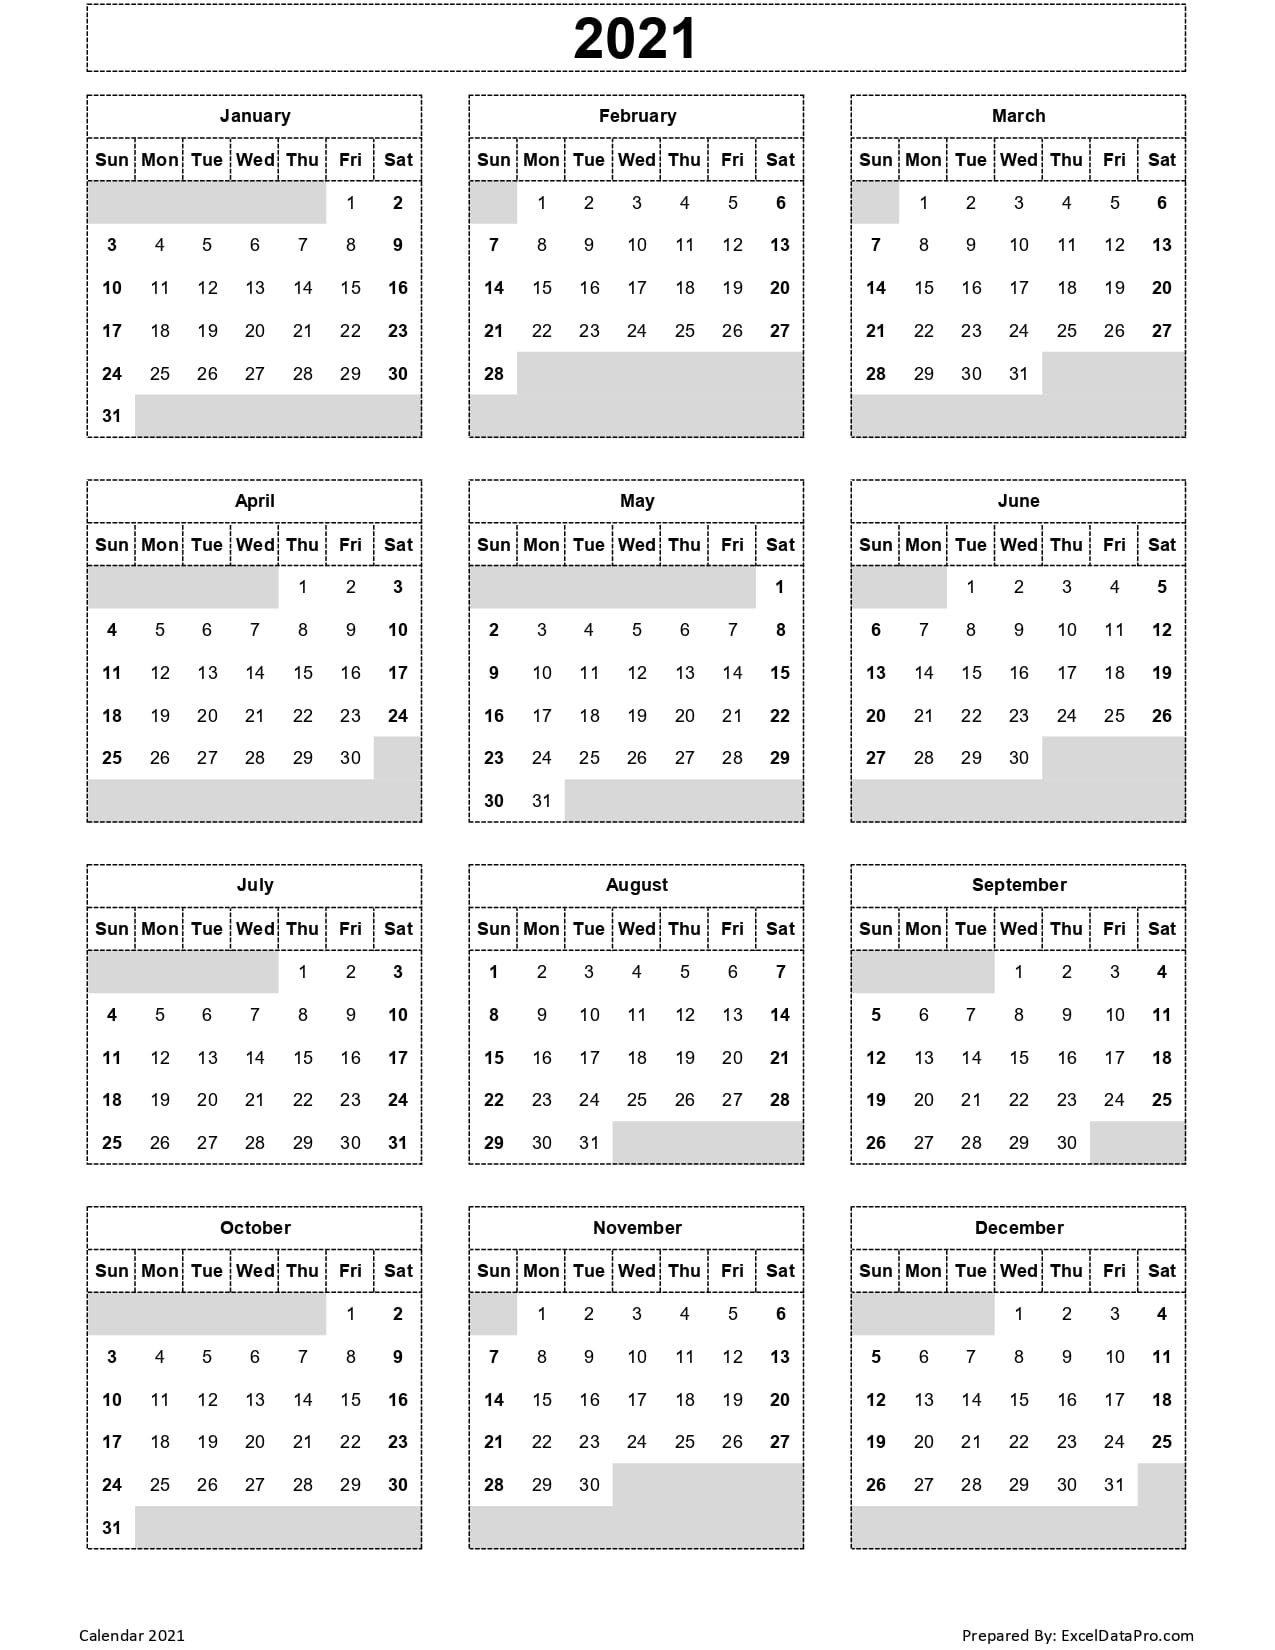 Download 2021 Yearly Calendar (Sun Start) Excel Template